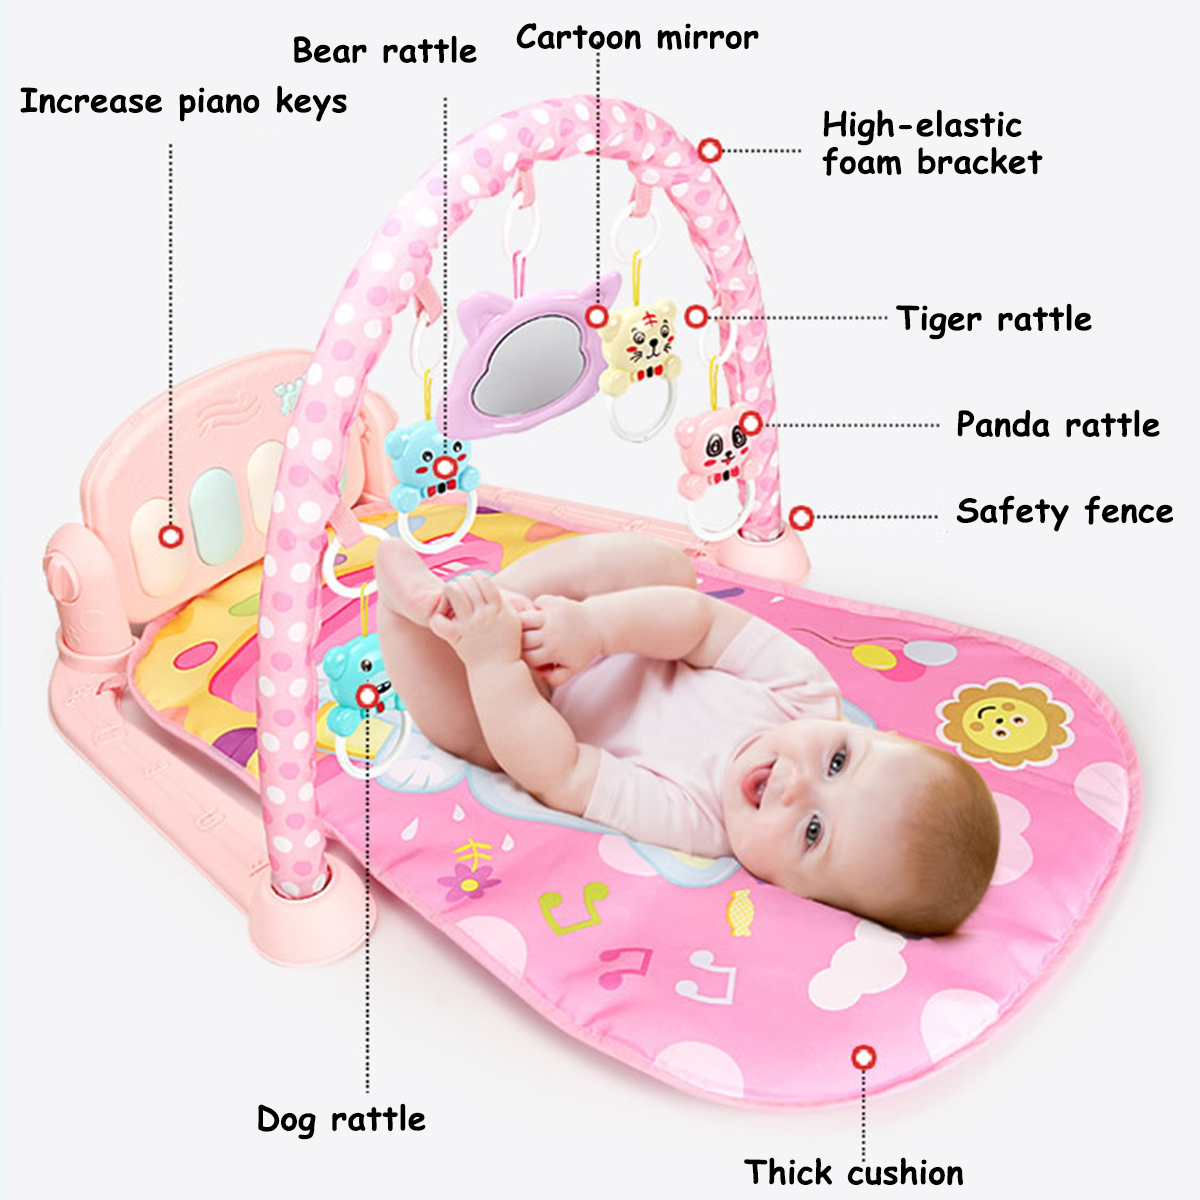 Baby-Mini-Musical-Piano-Carpet-Educational-Toys-For-0-36-Months-Fitness-Play-Mat-1650218-5